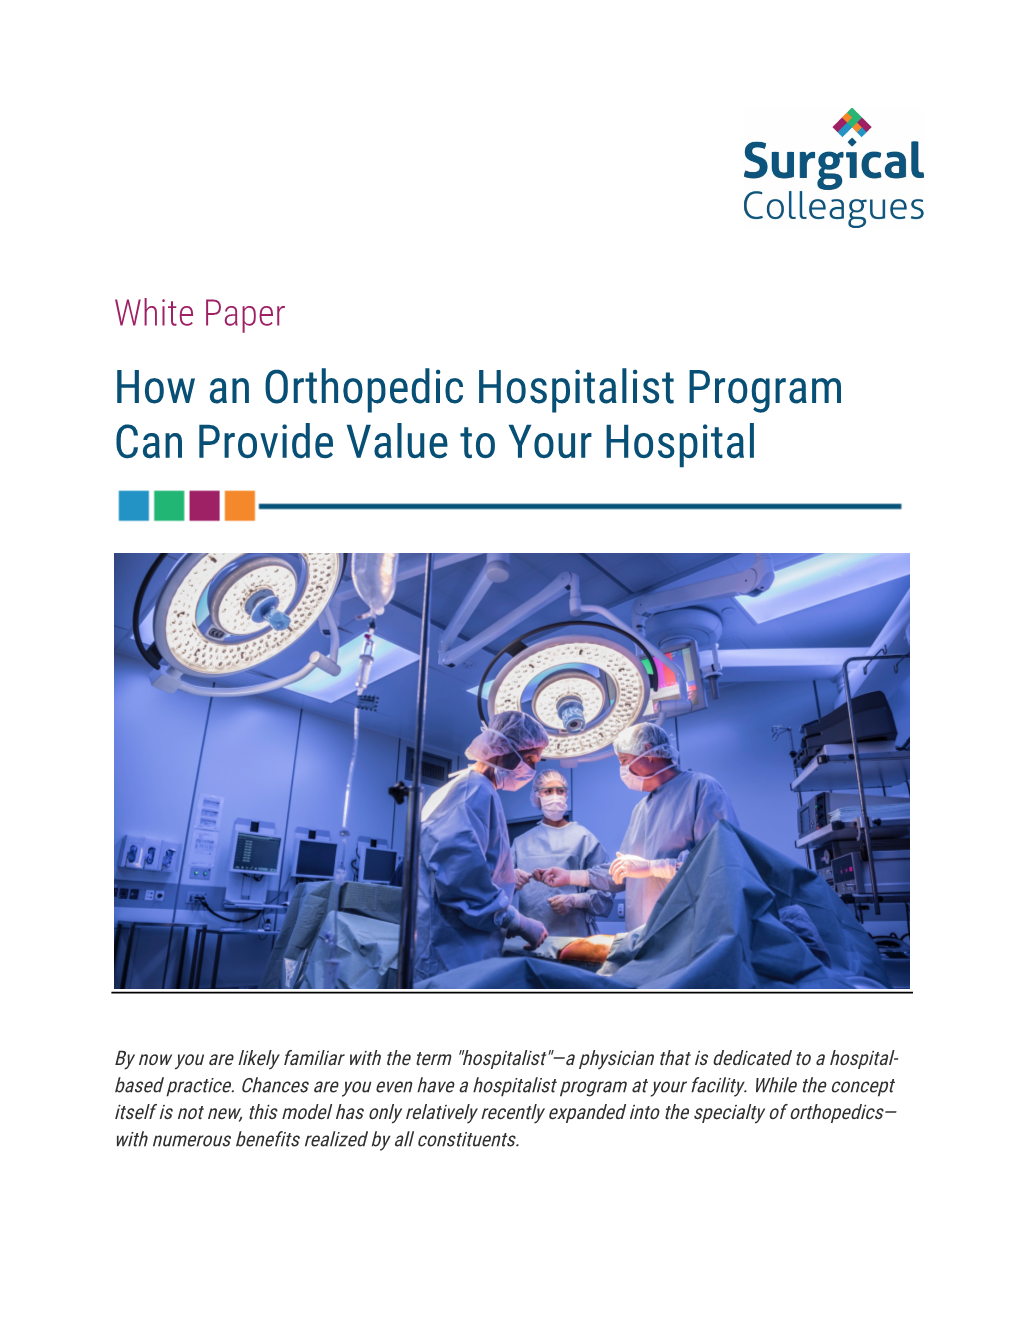 How an Orthopedic Hospitalist Program Can Provide Value to Your Hospital